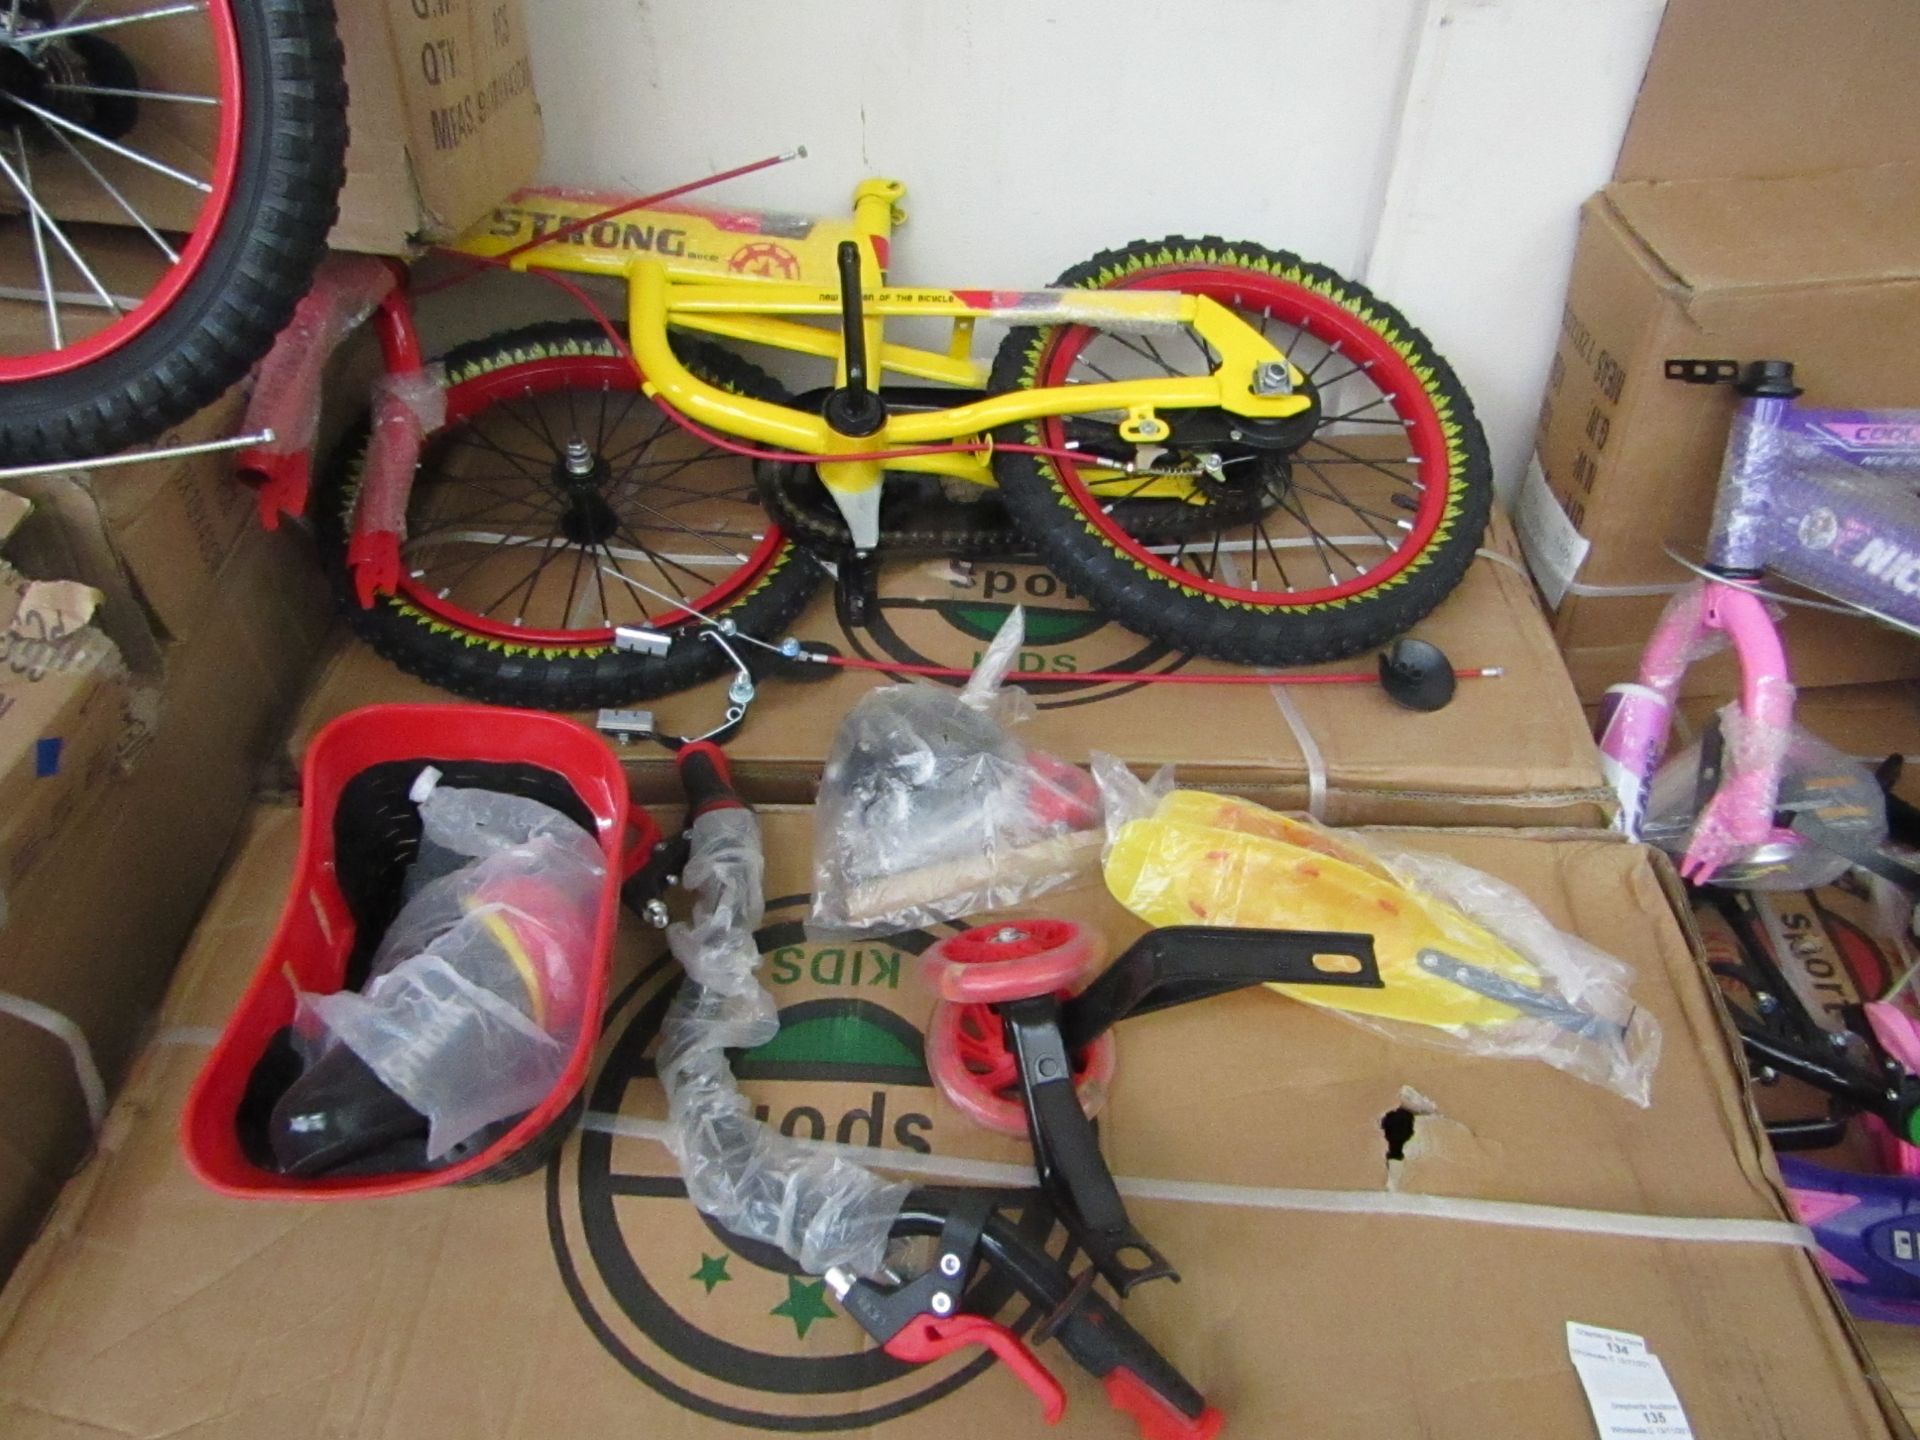 16" Child's Bike new and Boxed, comes complete with front basket, mud guards, water bottle and